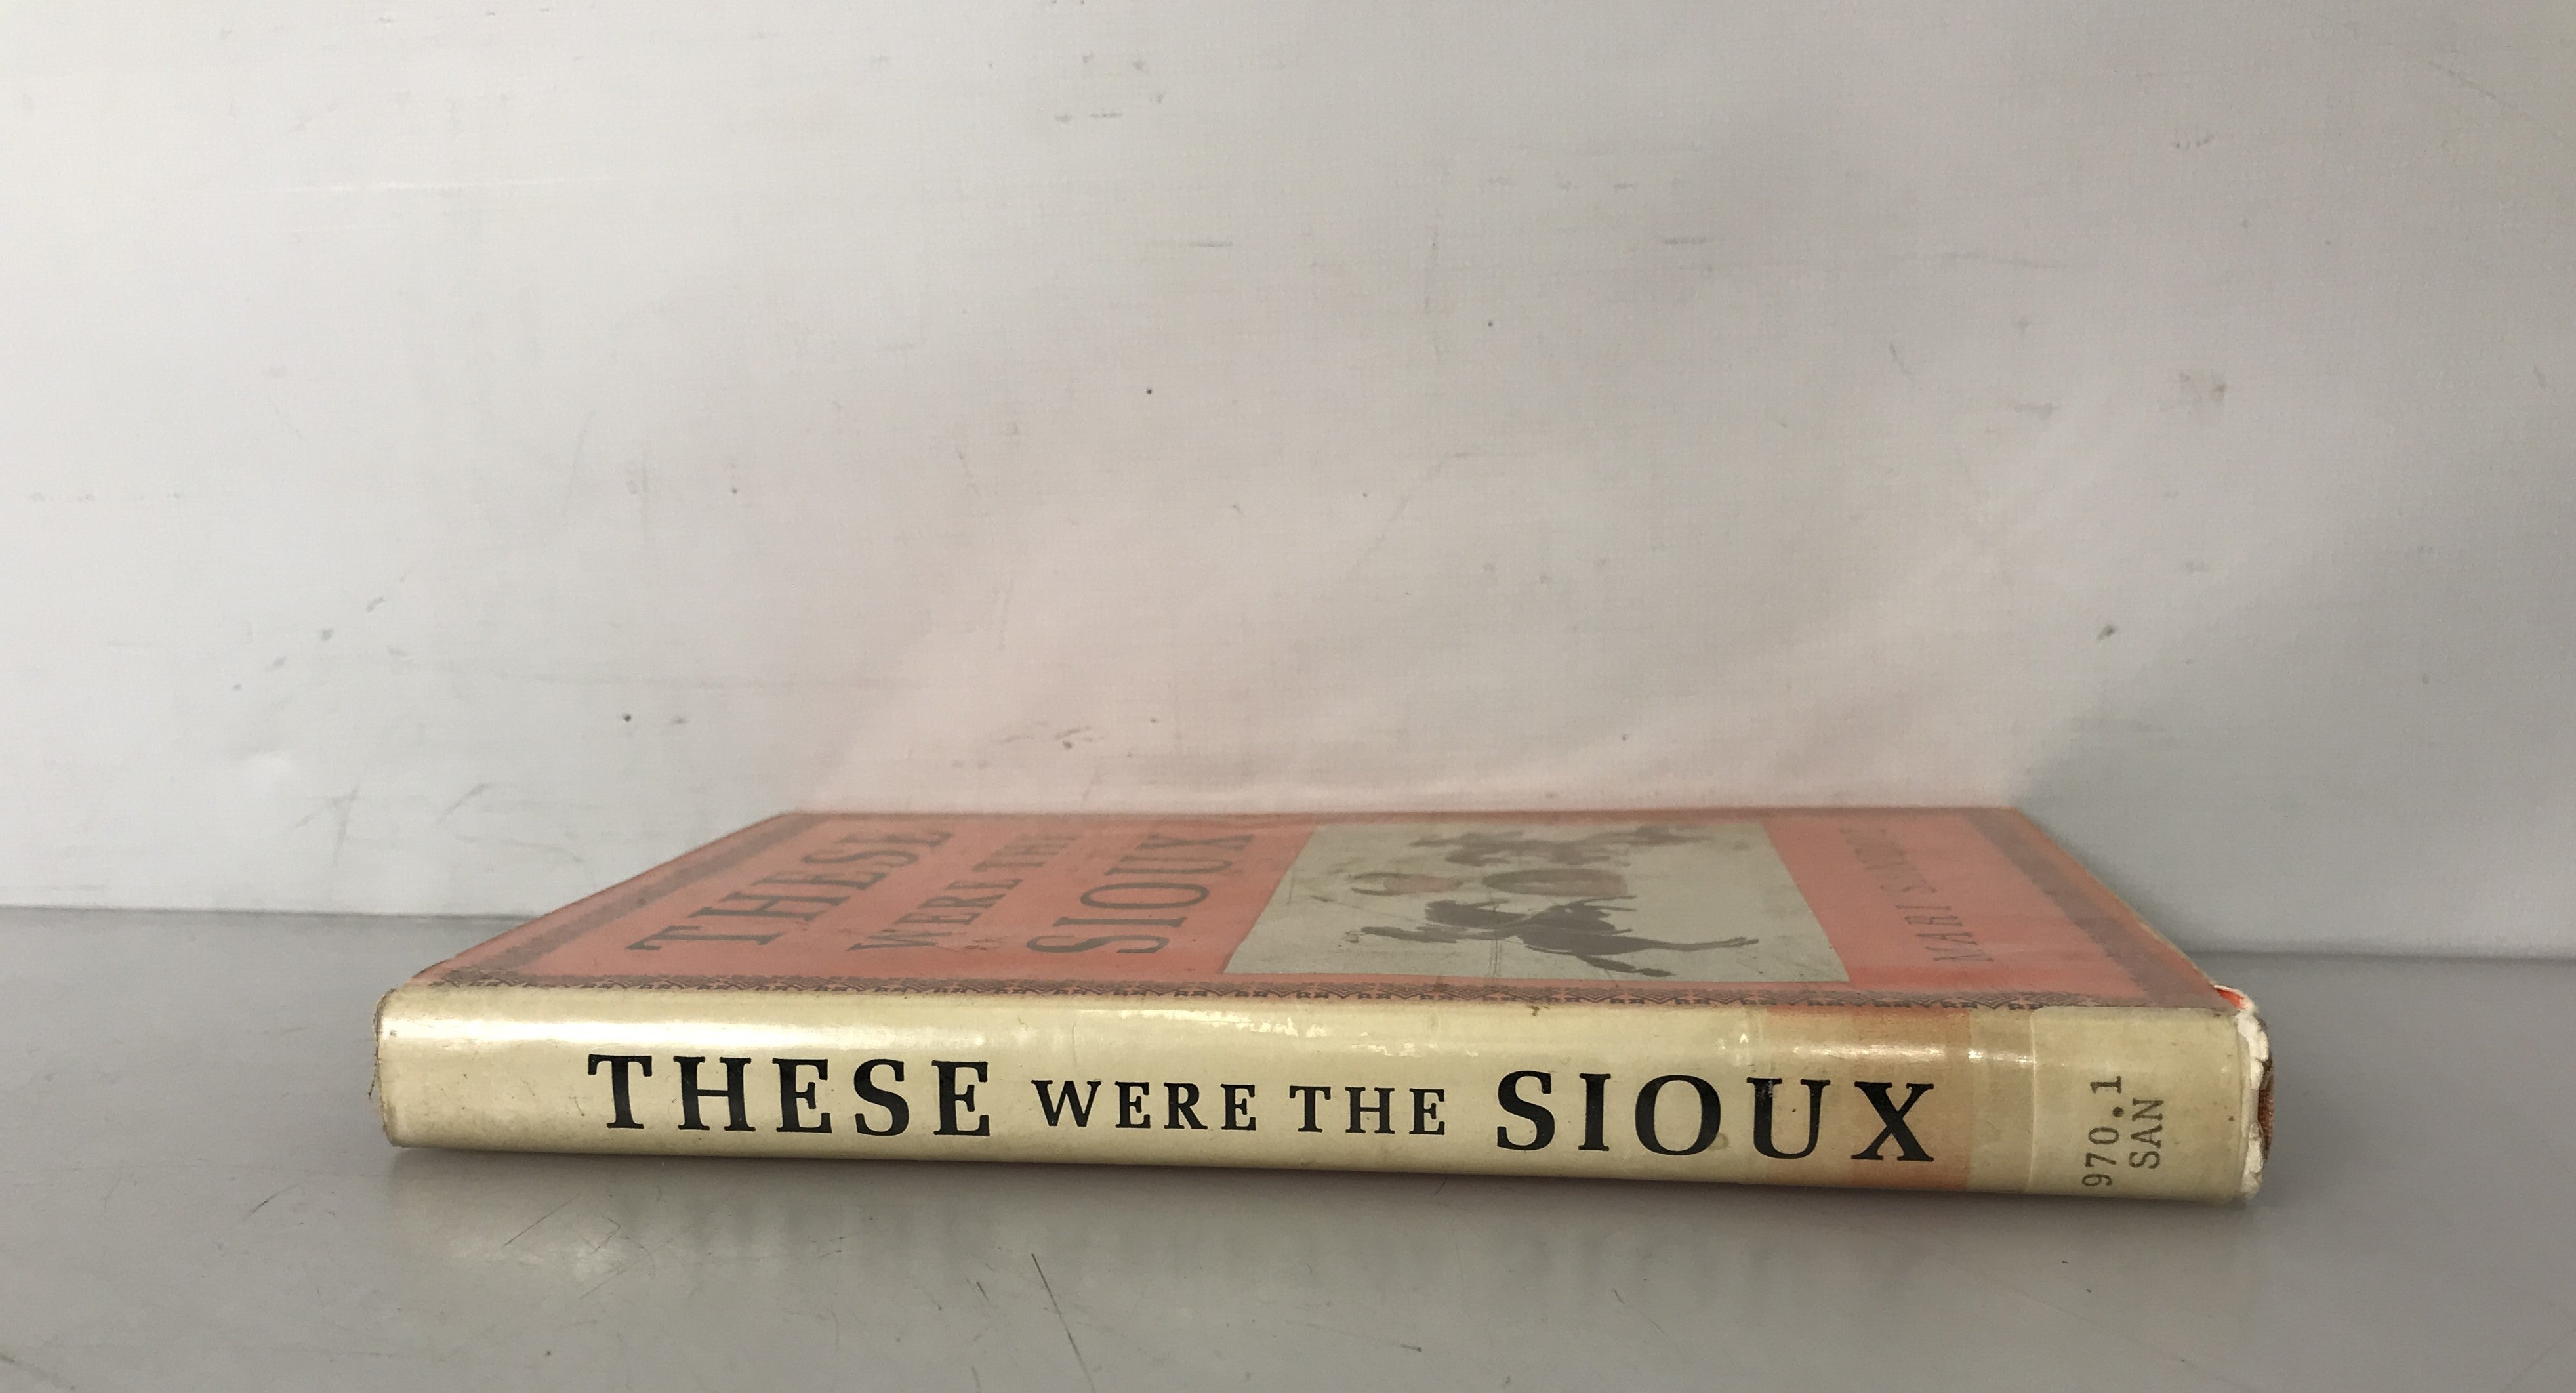 Lot of 2 Sioux History Books The Memoirs of Chief Red Fox and These Were the Sioux 1961, 1971 HC DJ